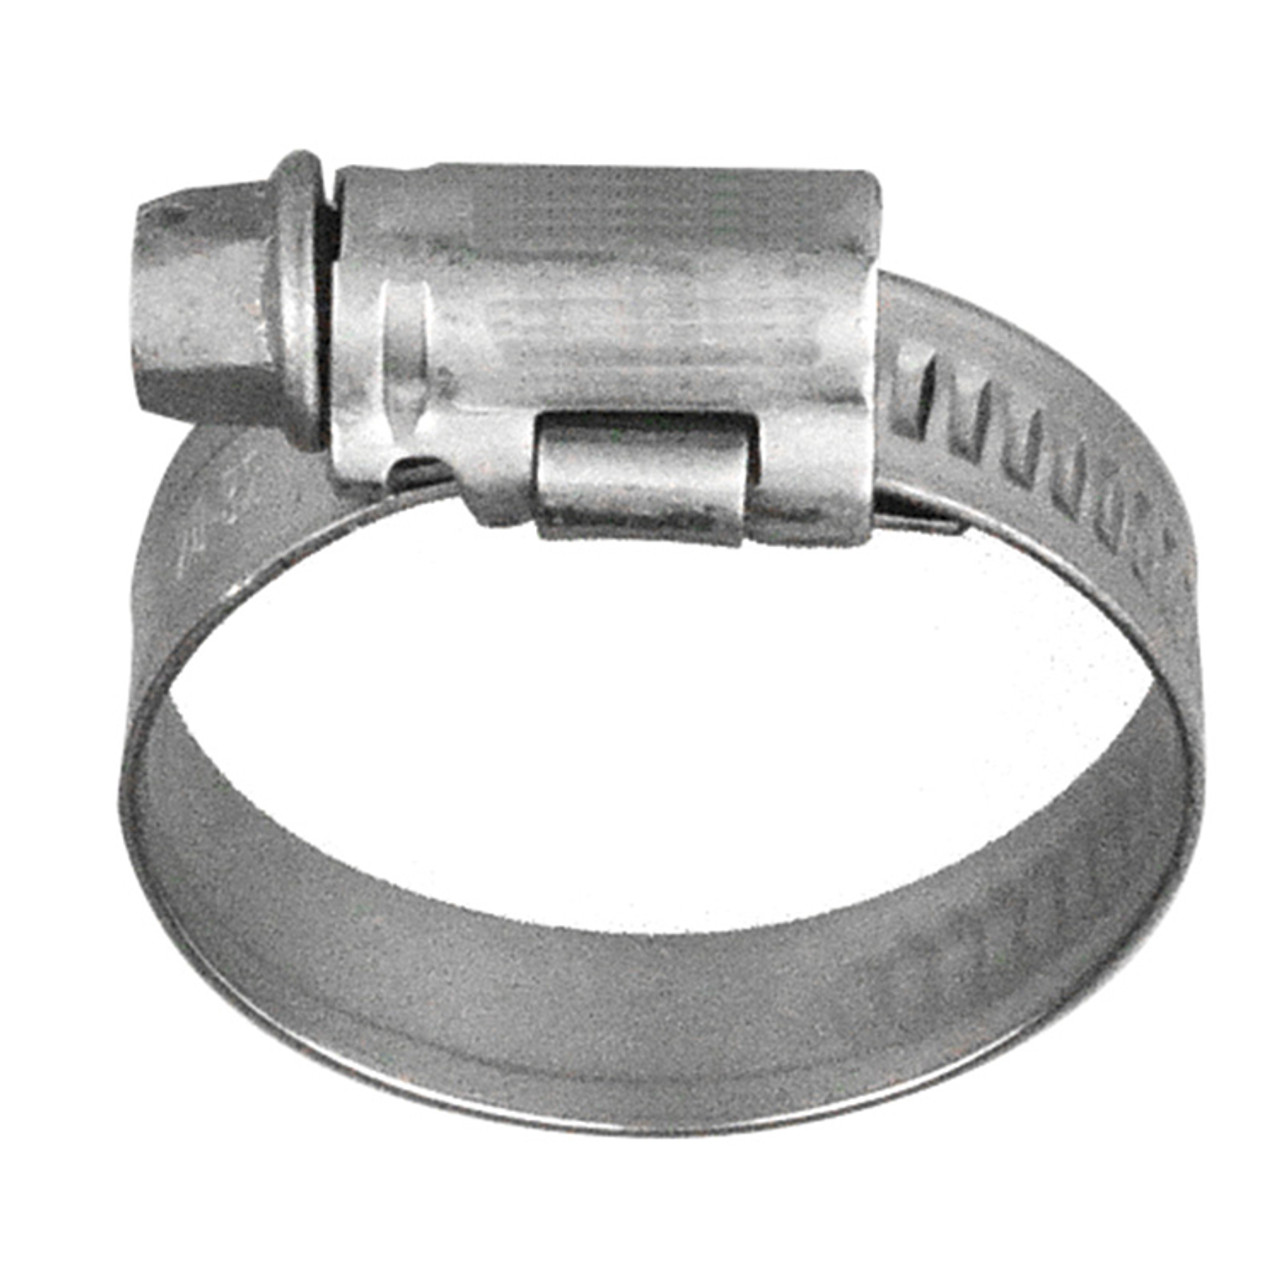 32 - 50mm Steel Worm Gear Hose Clamp   G7A-3250